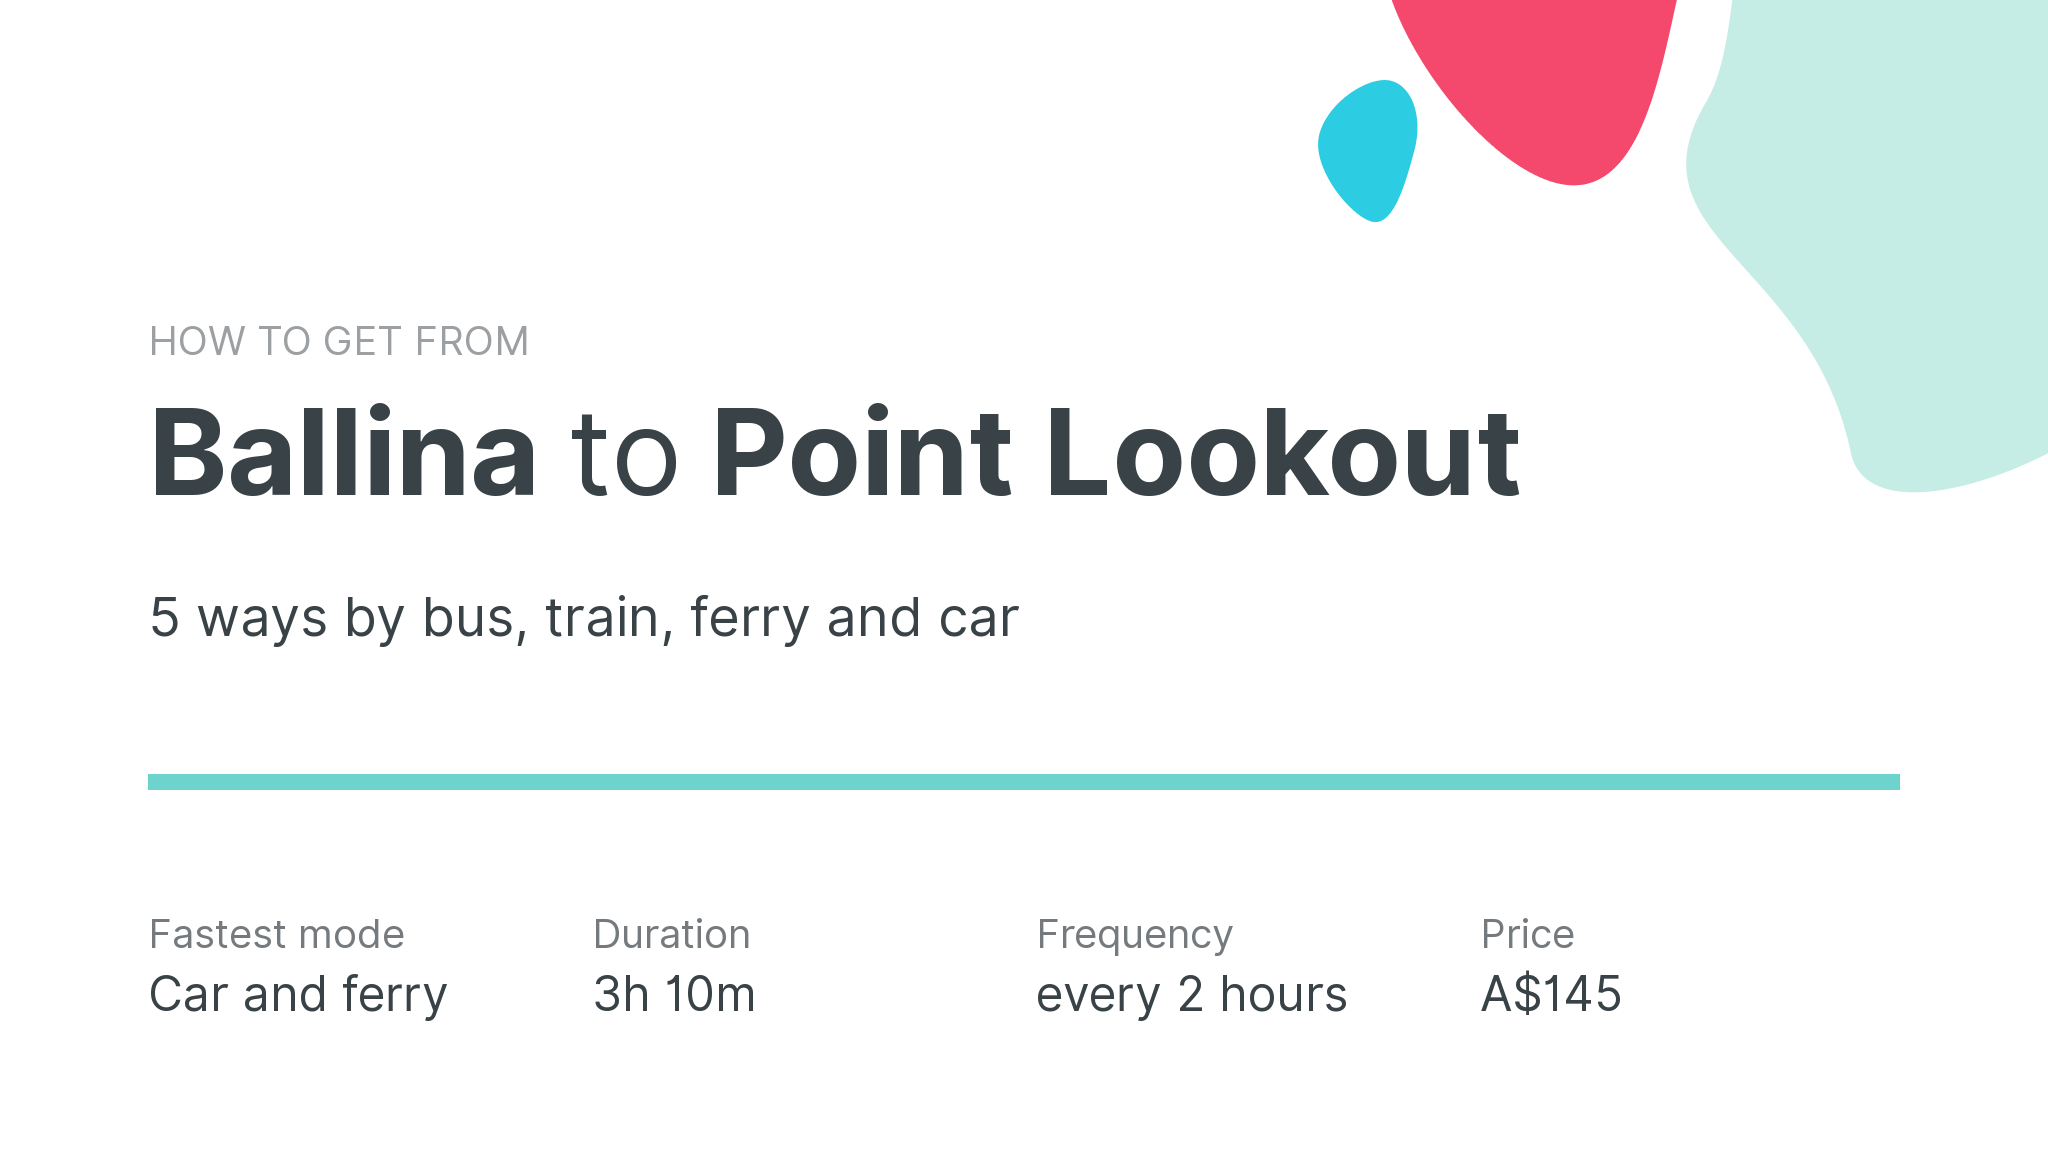 How do I get from Ballina to Point Lookout